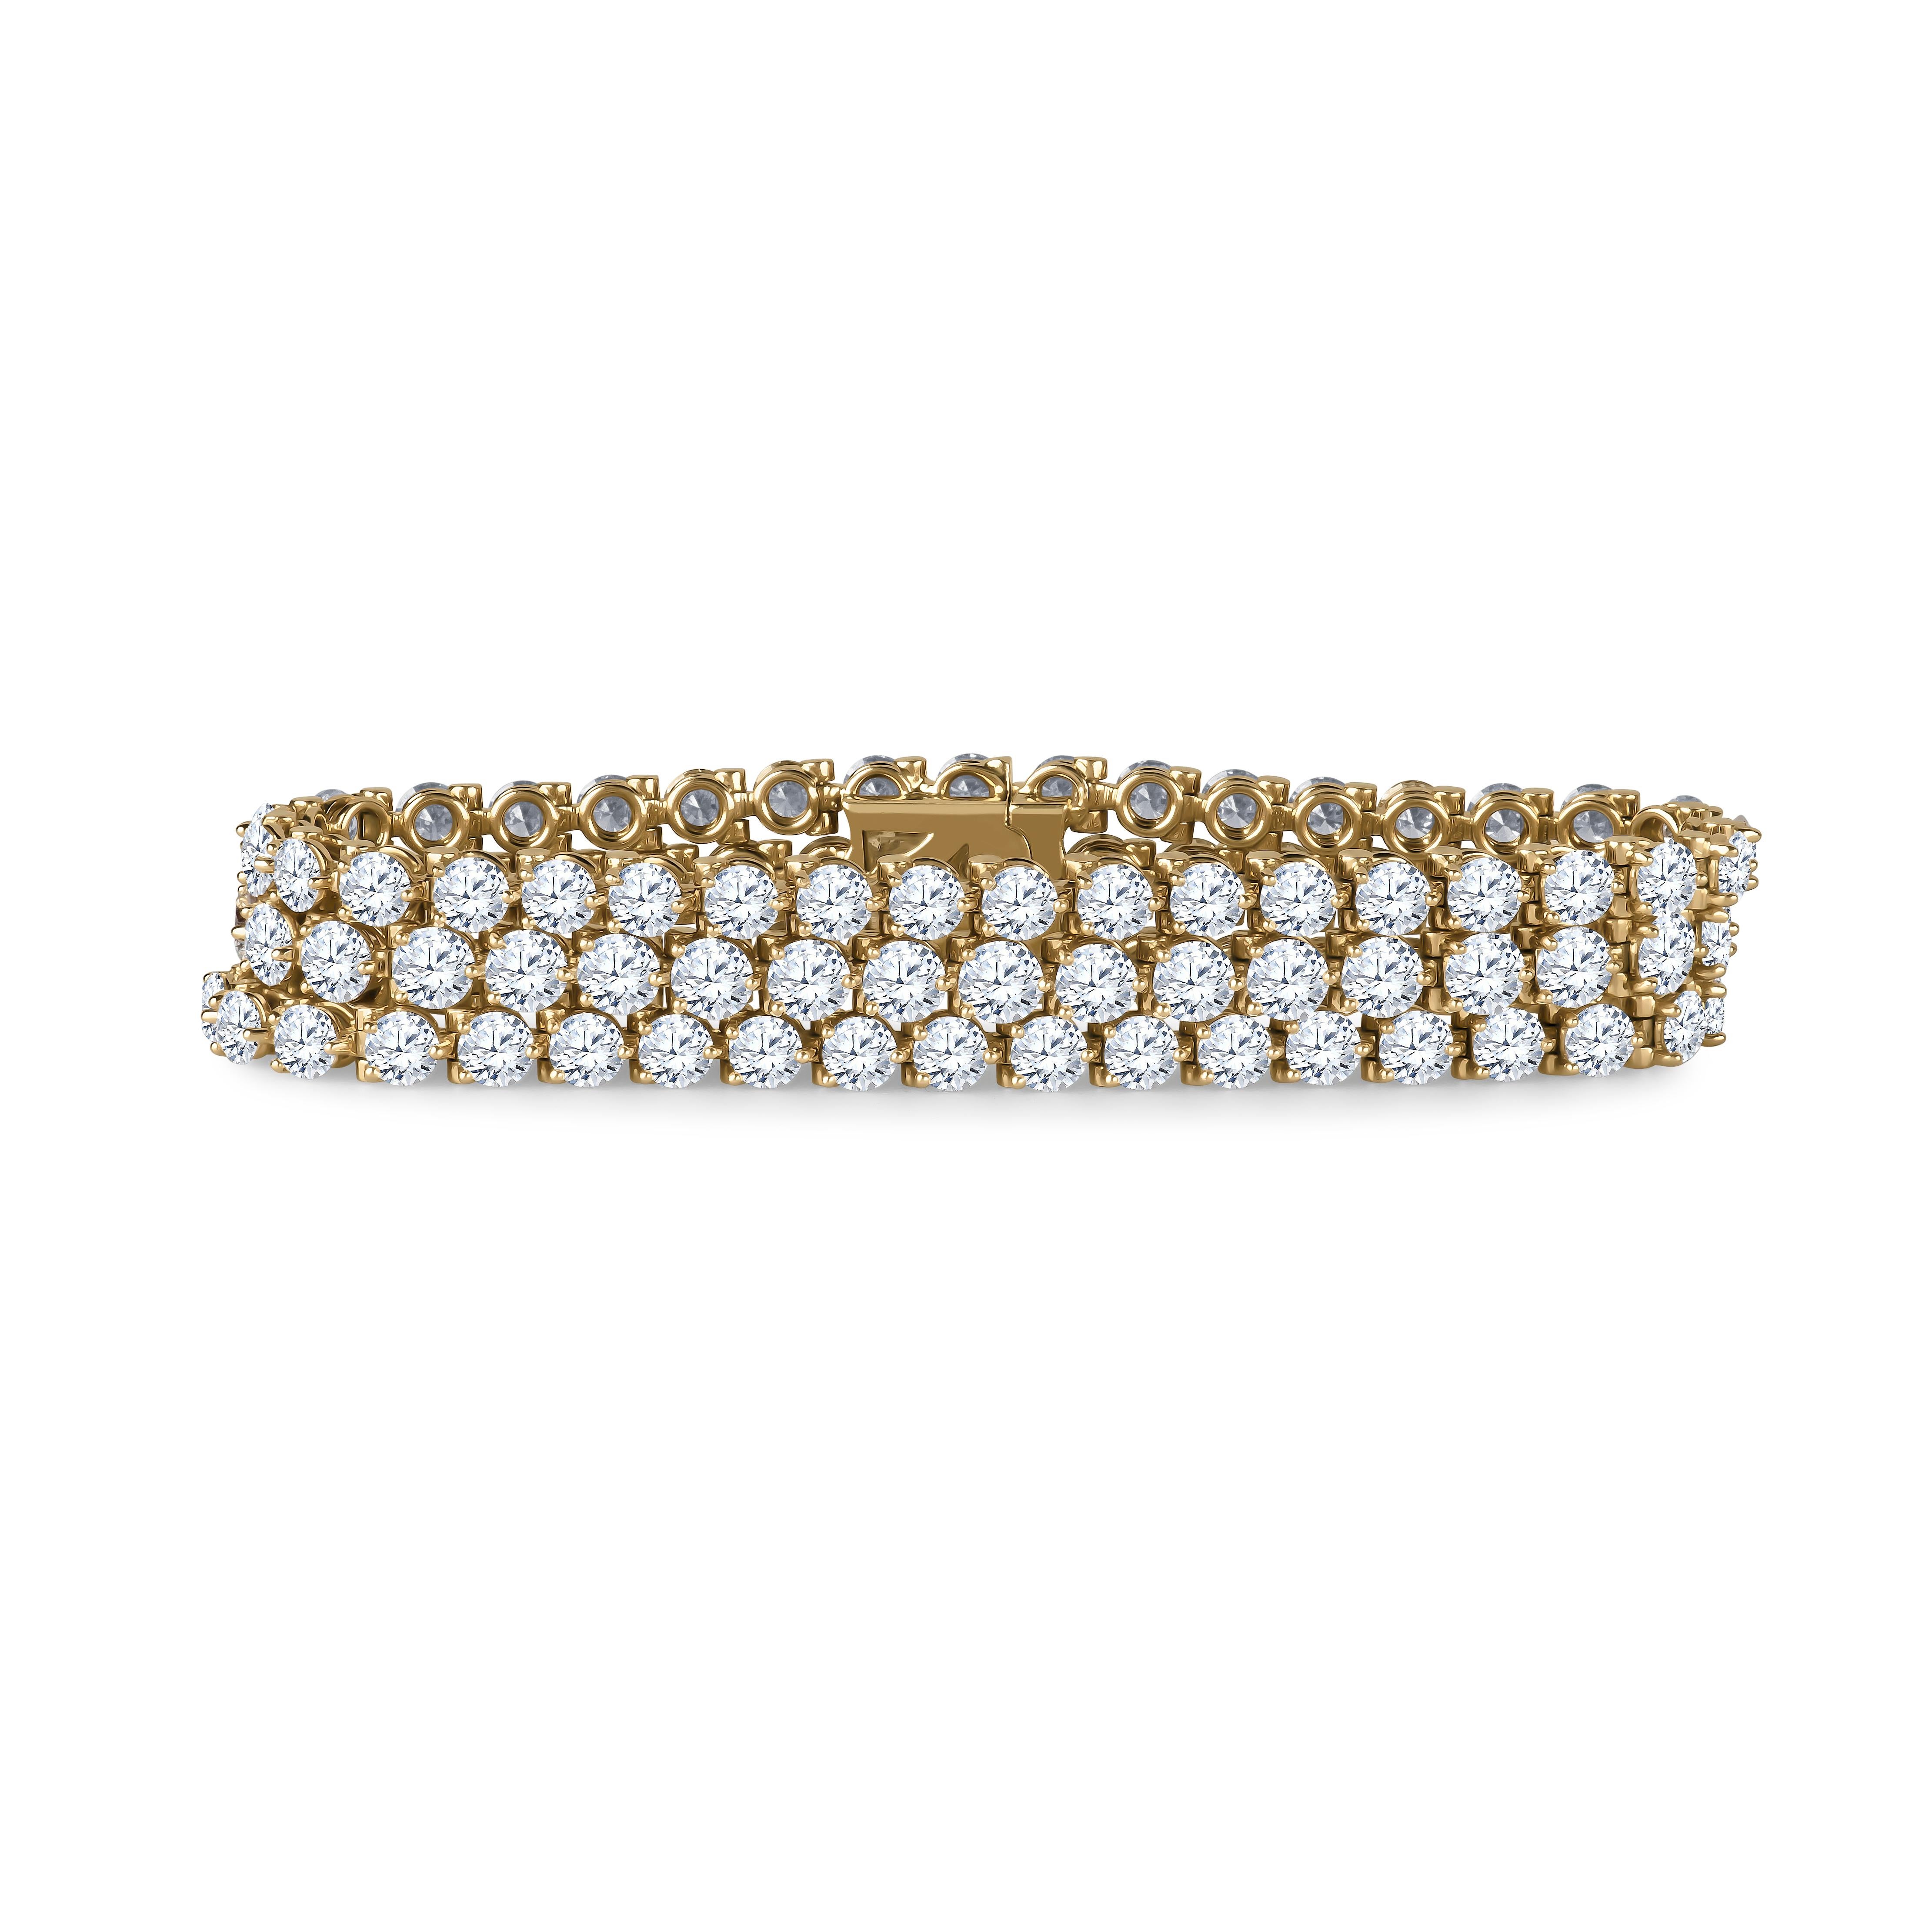 Cartier 18k yellow gold 3-row bracelet with approximately 26.71 carat total weight in Diamonds. Beautifully matched diamonds of D-F color, VVS1-VS2 clarity.  Comes with Cartier inner and outer box.